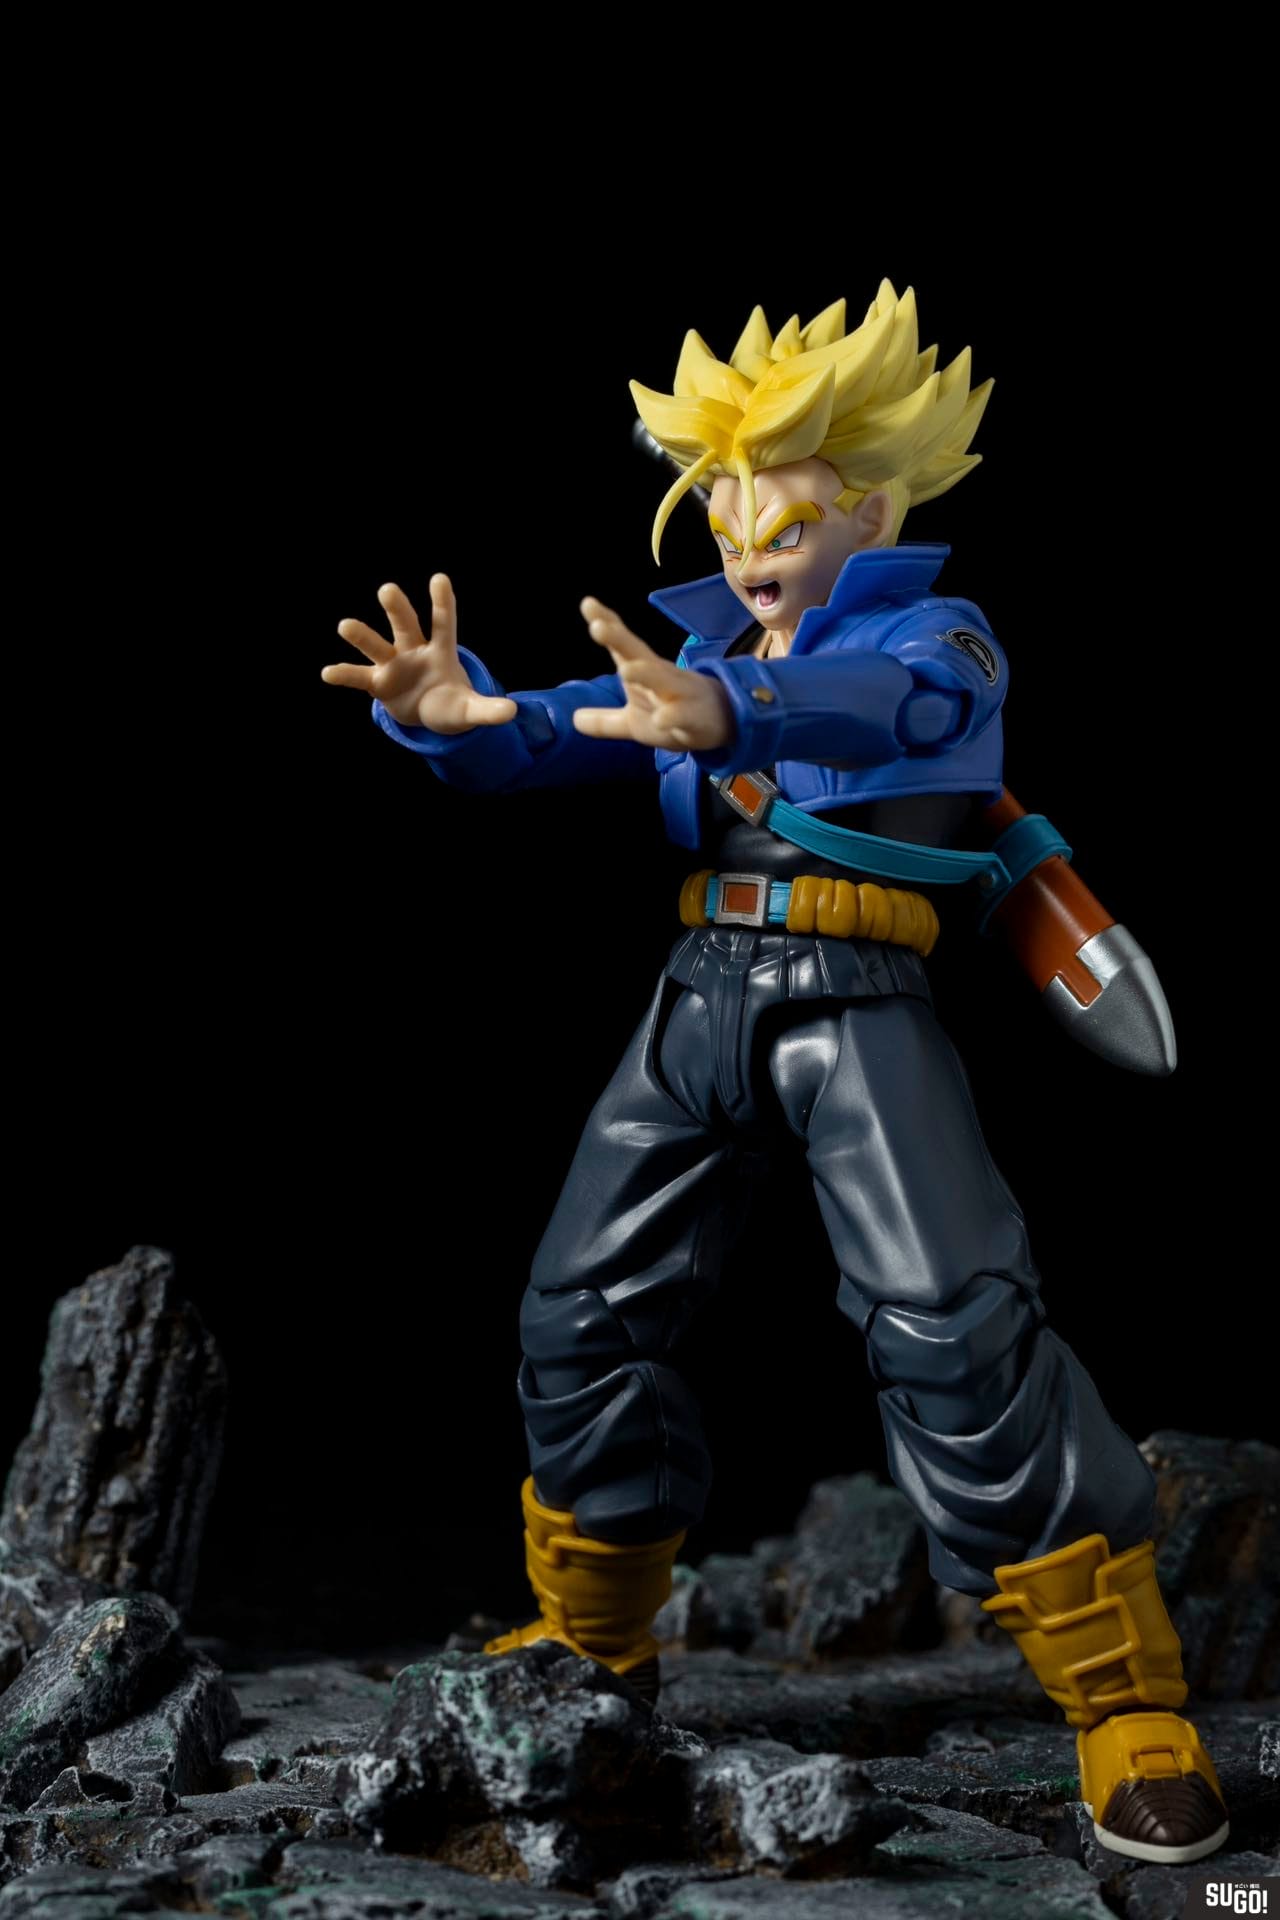 S.H.Figuarts SUPER SAIYAN TRUNKS - The Boy from the Future